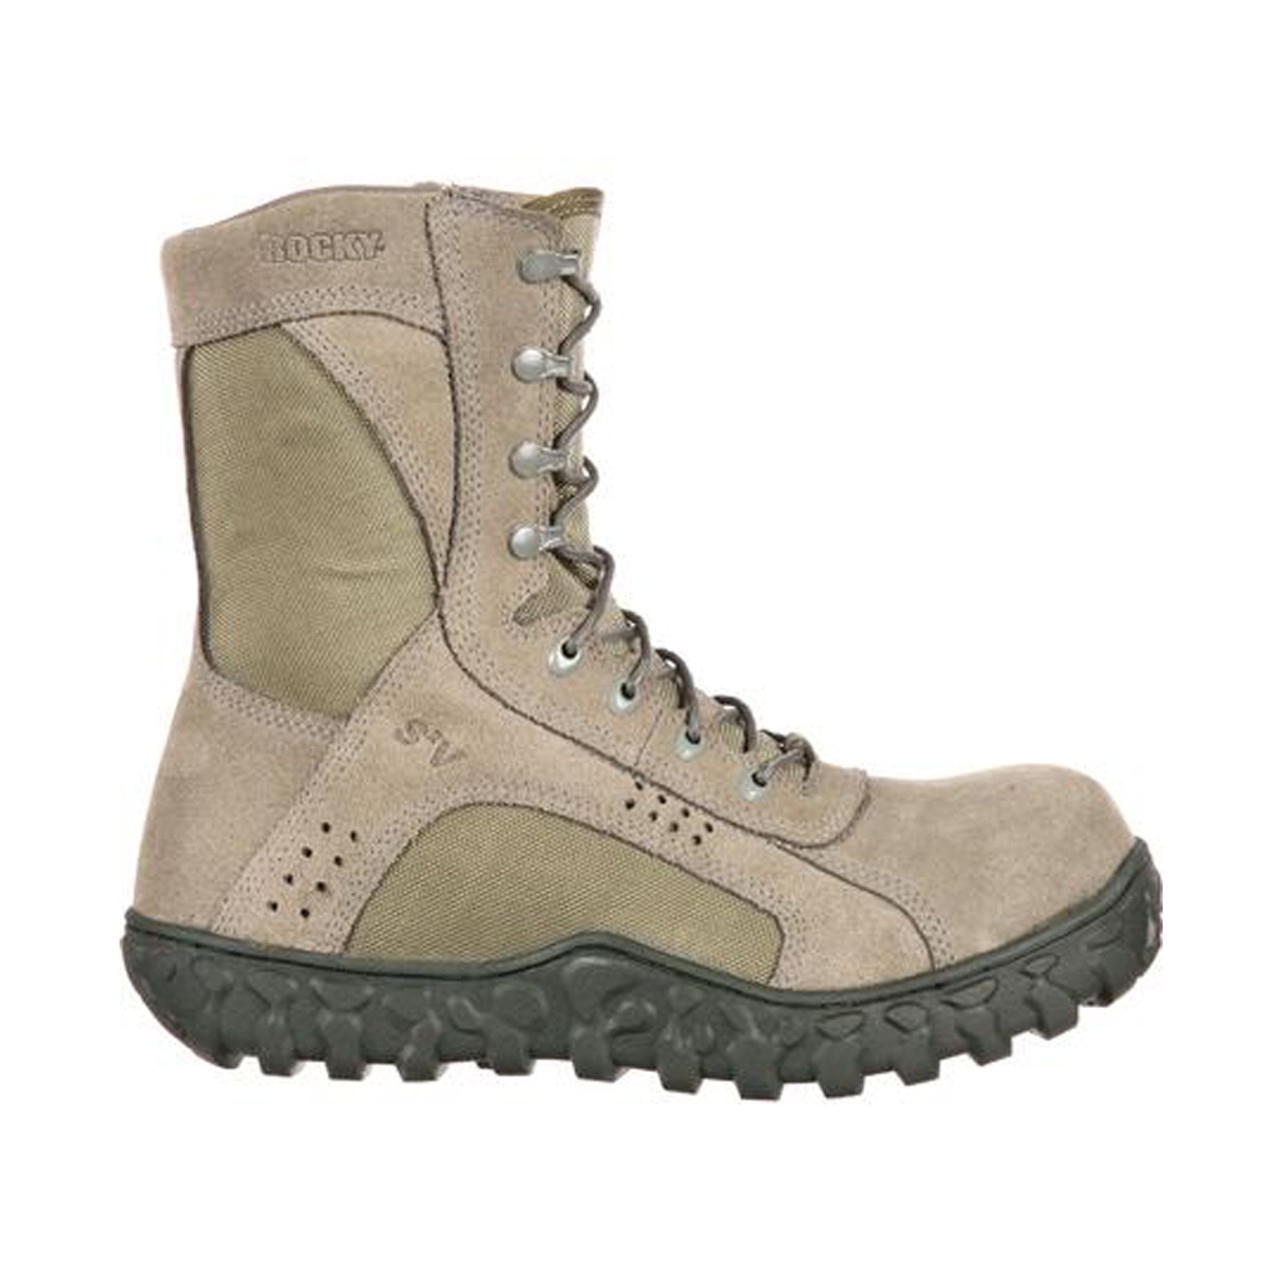 rocky composite toe military boots